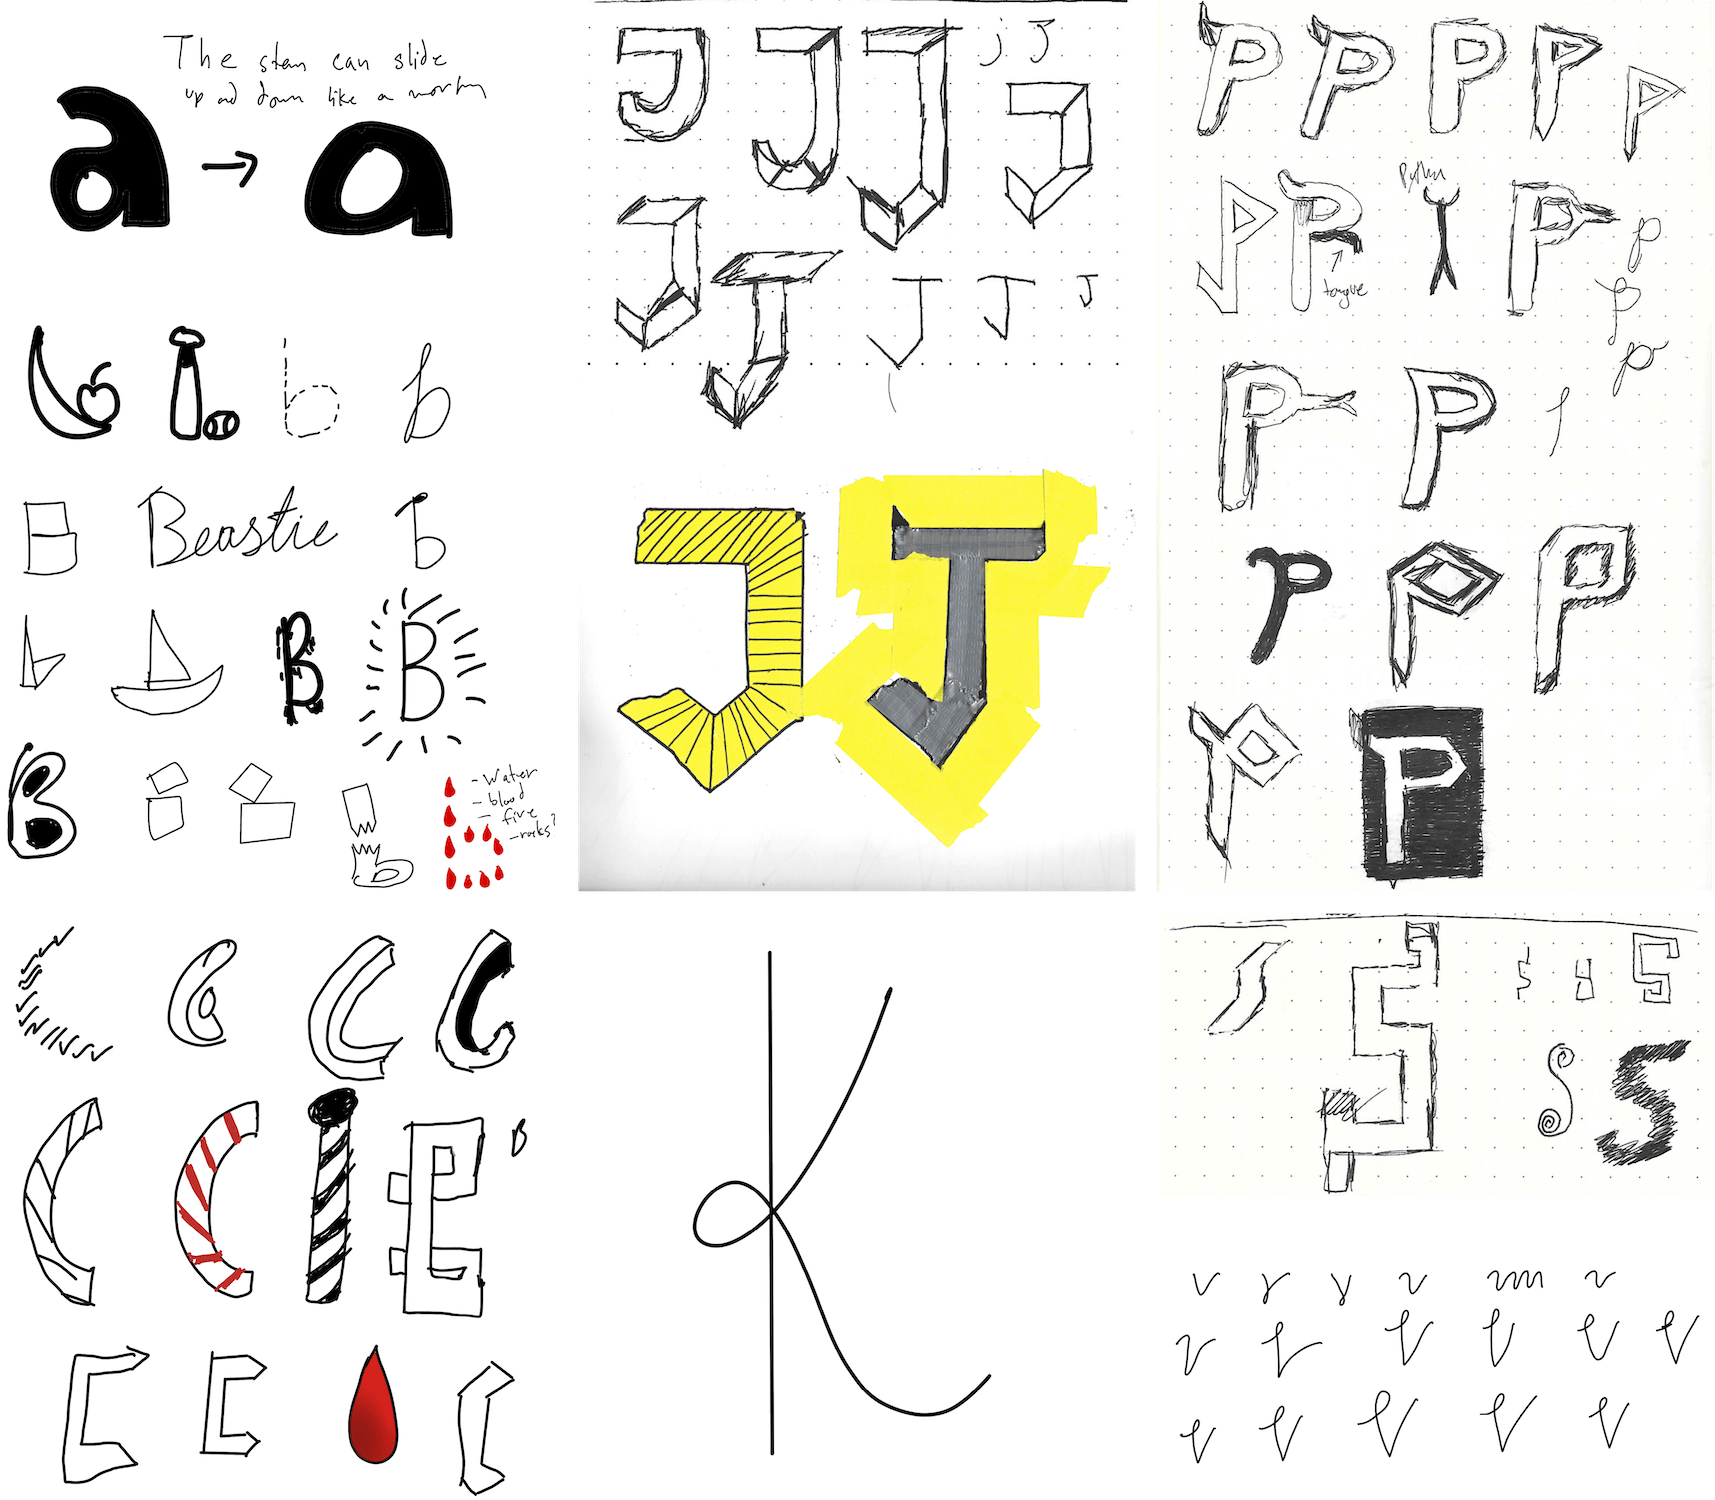 A grid of 9 pencil and Procreate sketches of various letterforms